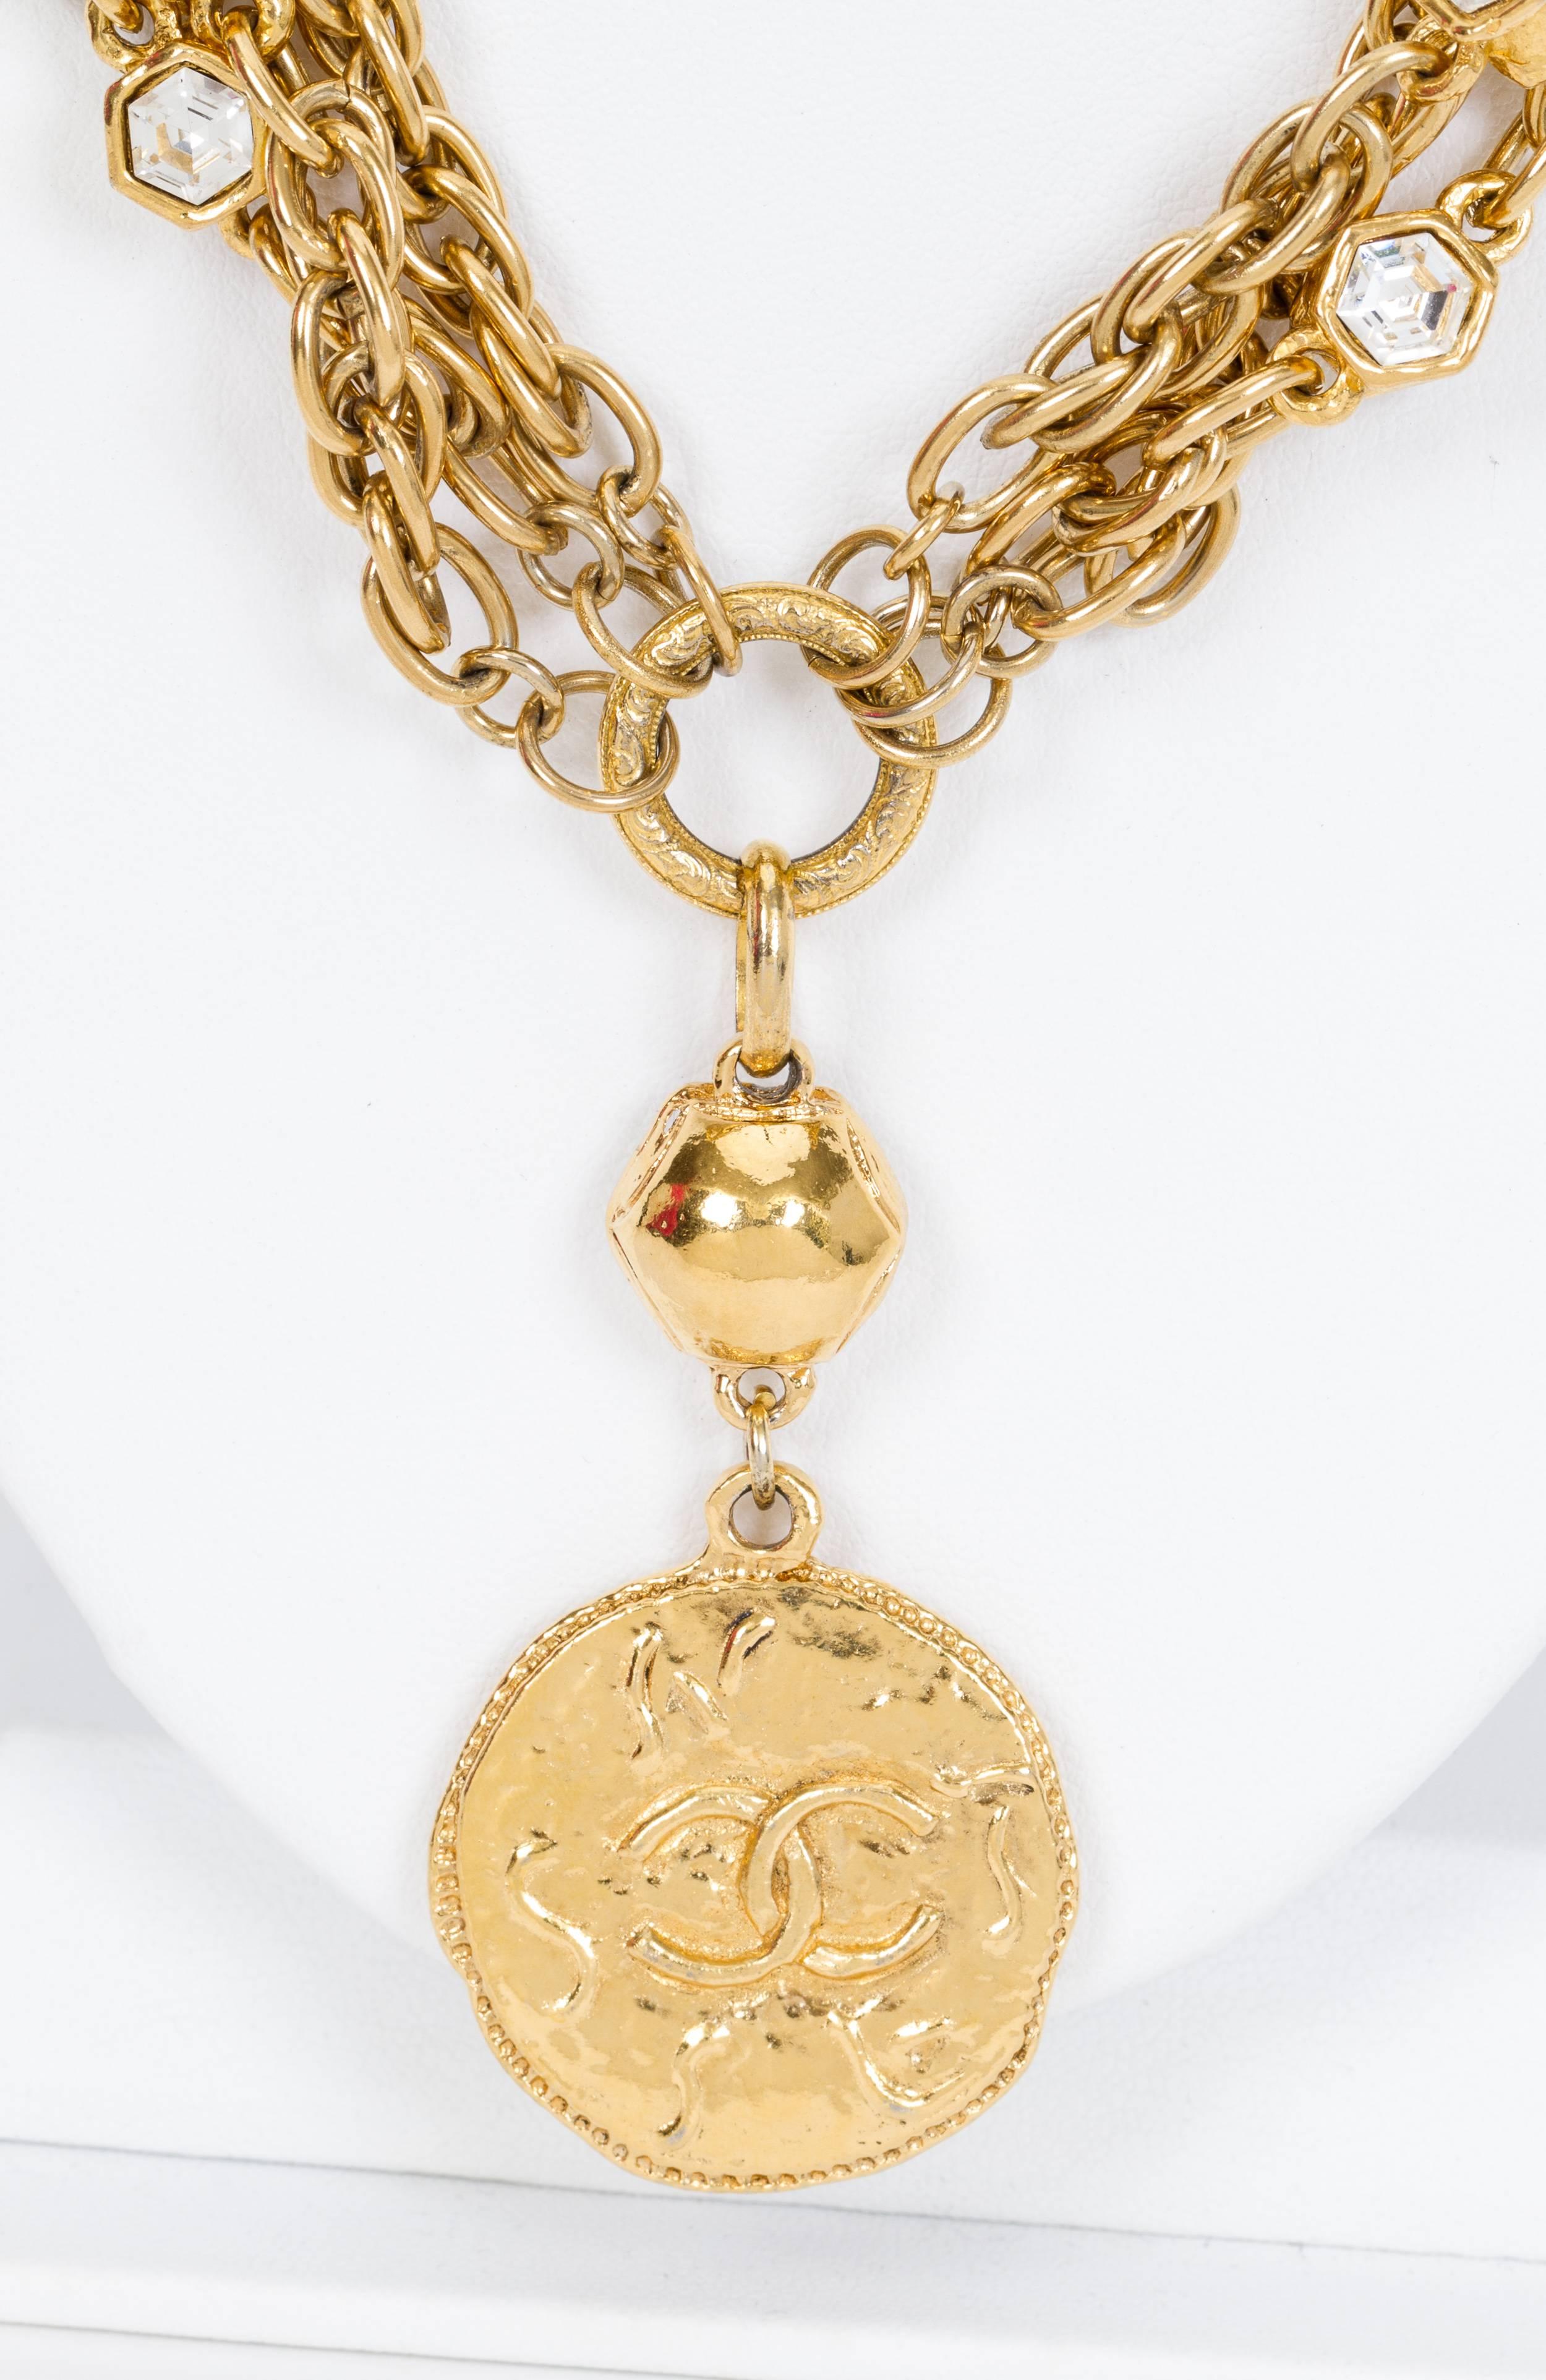 Chanel rare triple strand crystal necklace with center coin pendant. 70's collection. Comes with original box.